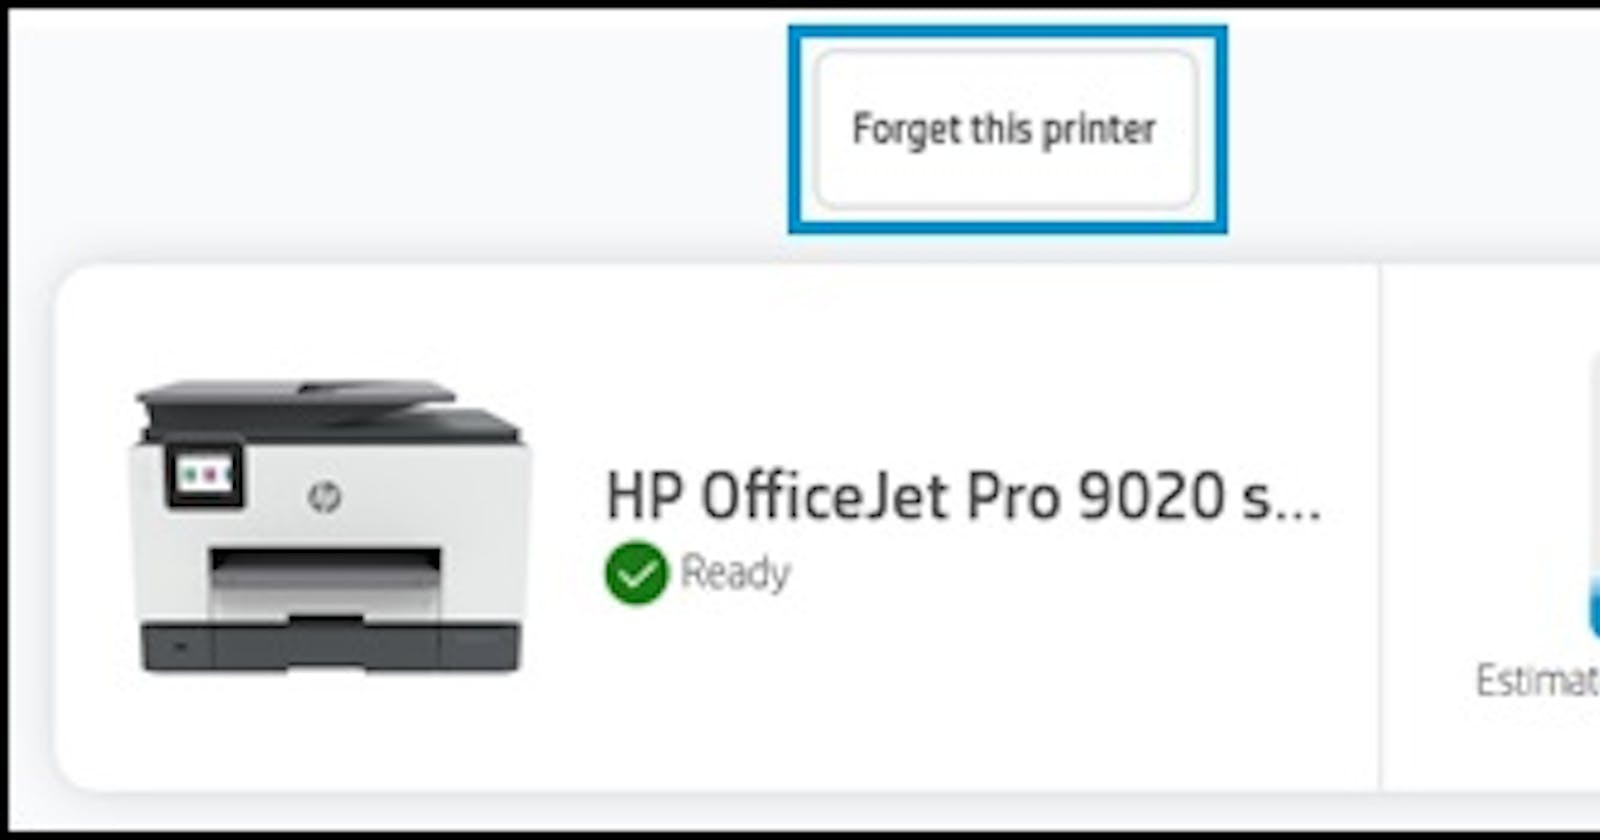 How to Resolve Incomplete Setup Error on HP Printers?